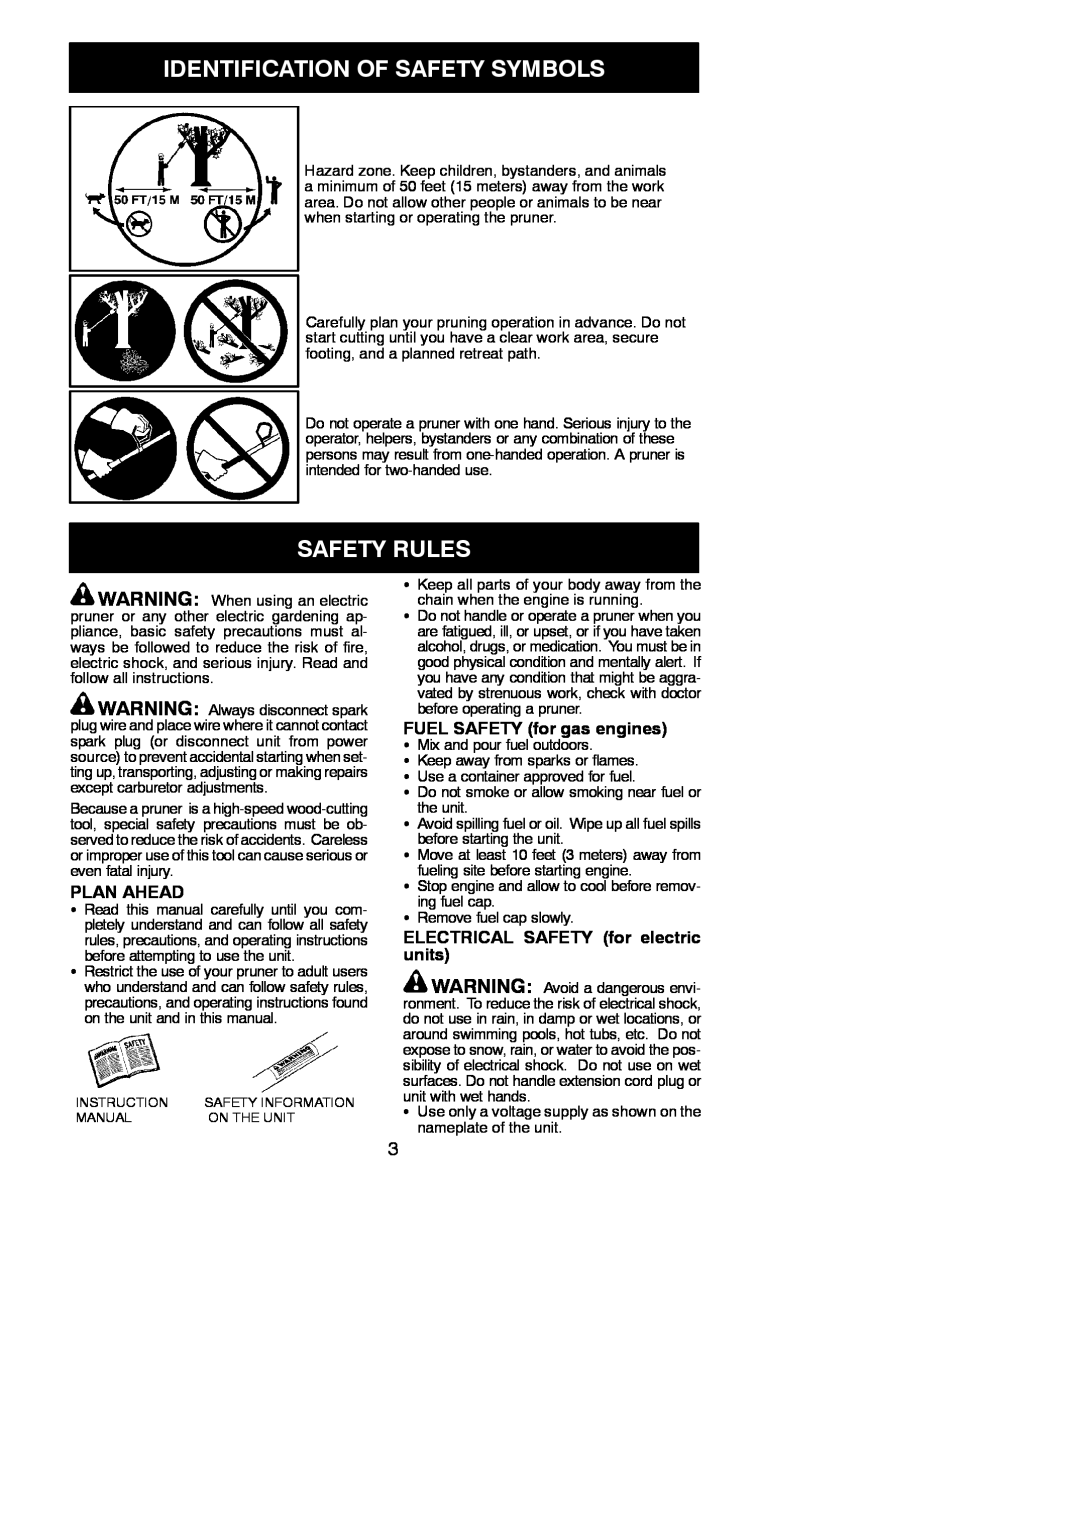 Poulan PPB5500P, 952711671 Safety Rules, Identification Of Safety Symbols, Plan Ahead, FUEL SAFETY for gas engines 